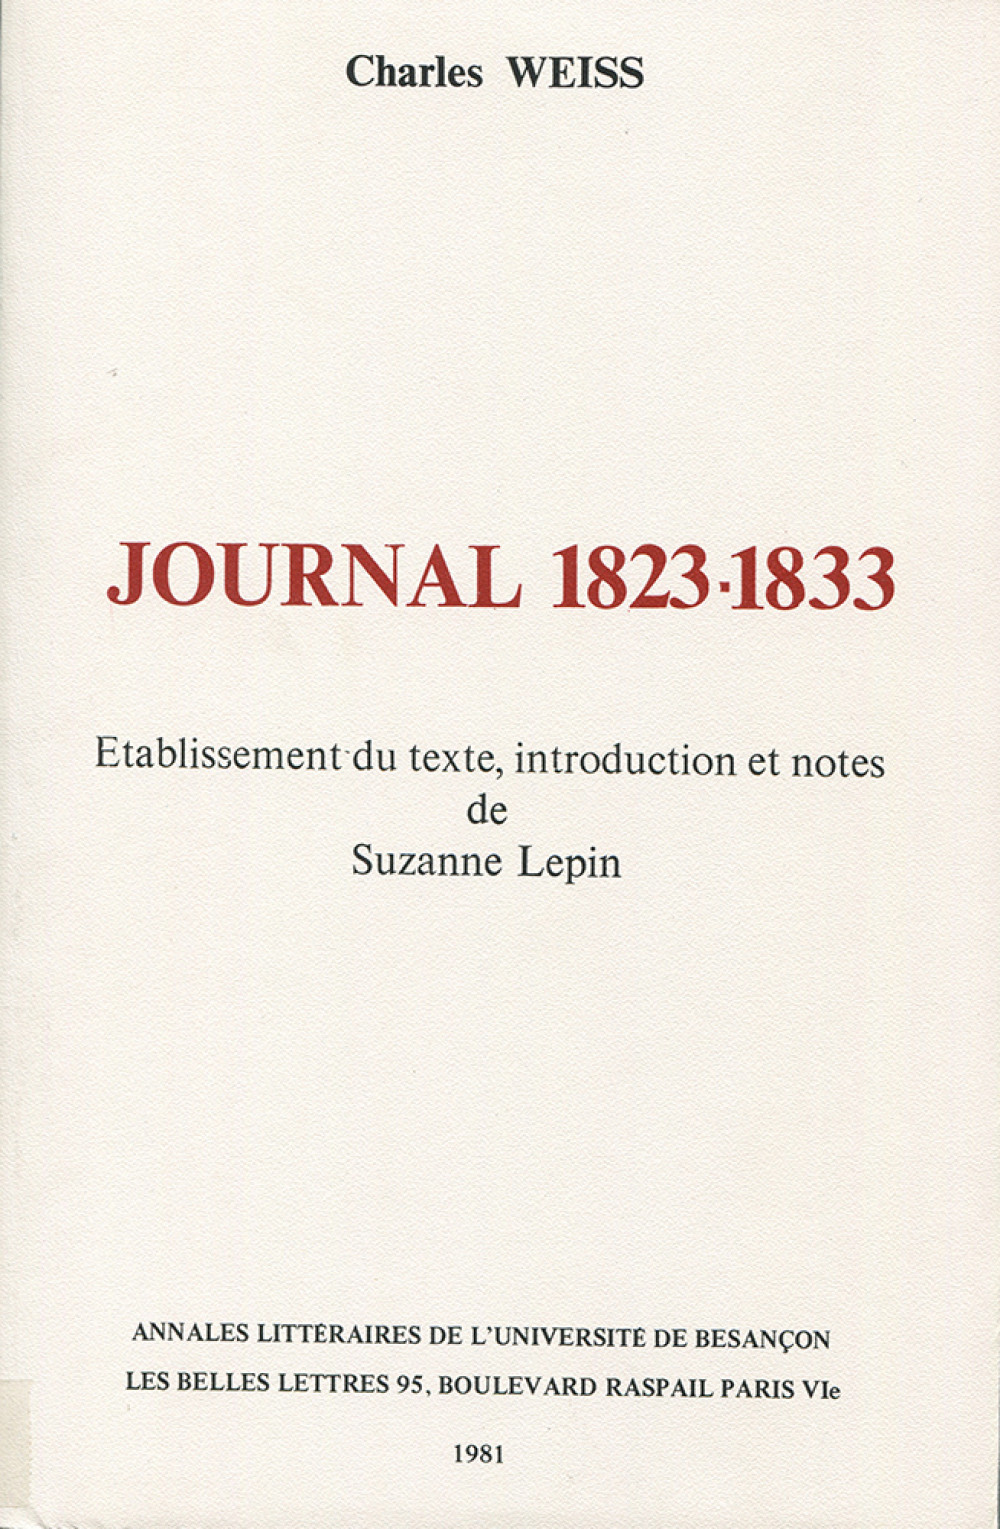 Charles Weiss. Journal 1823-1833